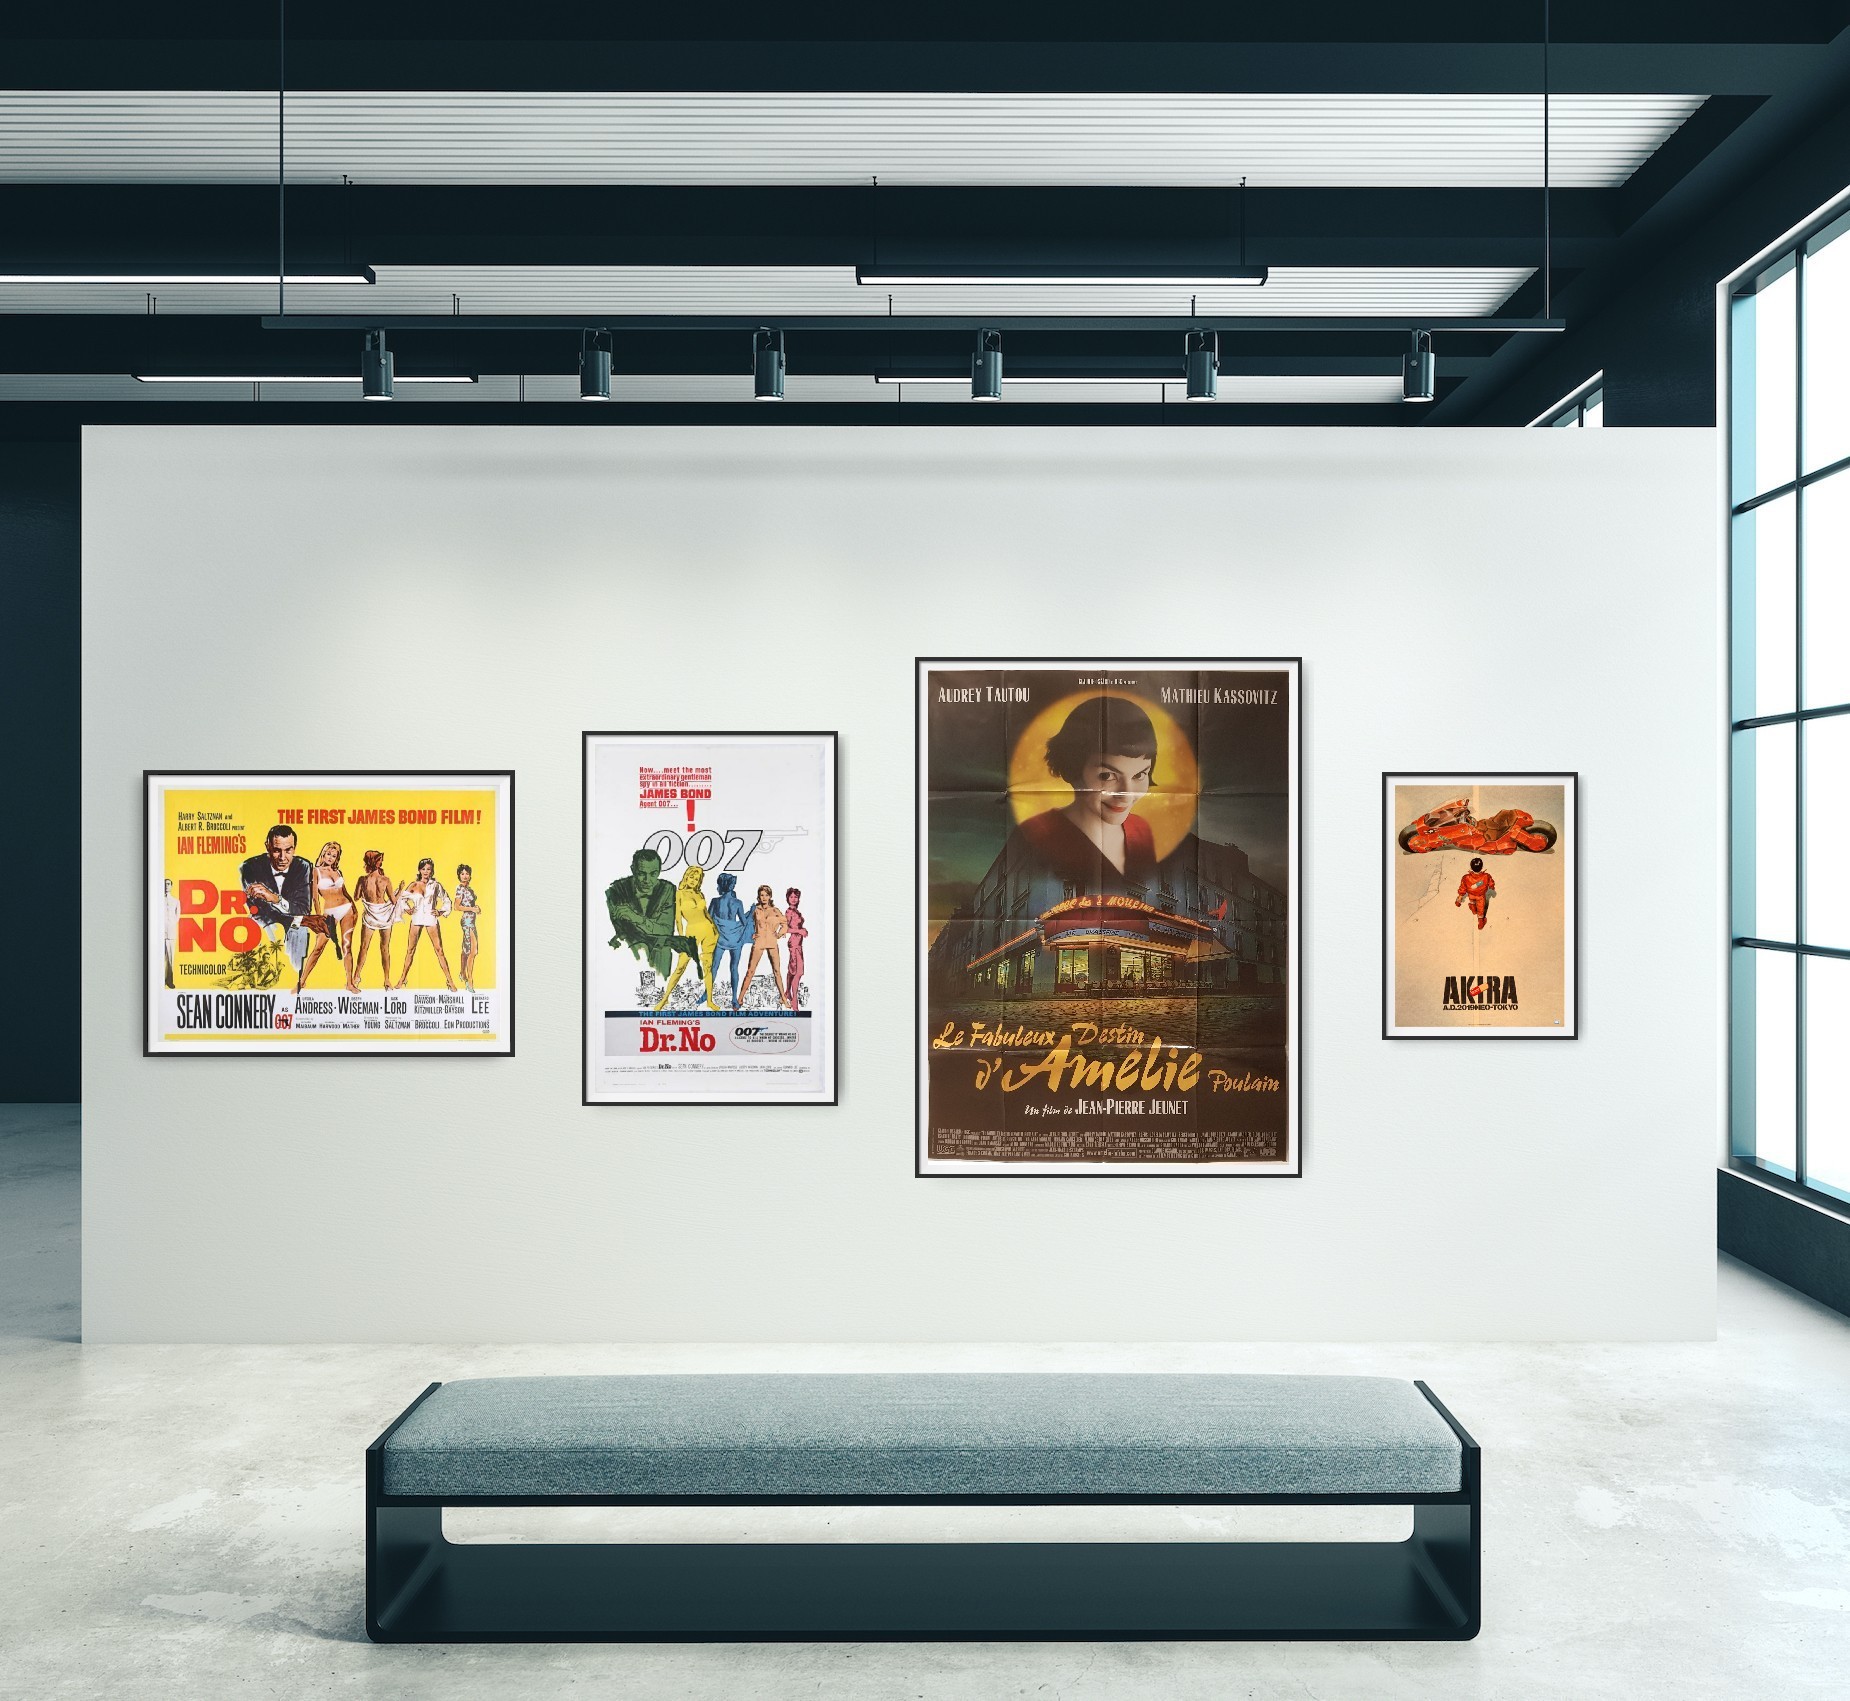 The image, from left to right, shows a Dr. No UK Quad Cinema Poster, a Dr. No US One Sheet poster, a French Grande for the film Amelie and a Japanese B2 poster for the film Akira. Images of all posters are shown to scale hanging on a gallery wall.